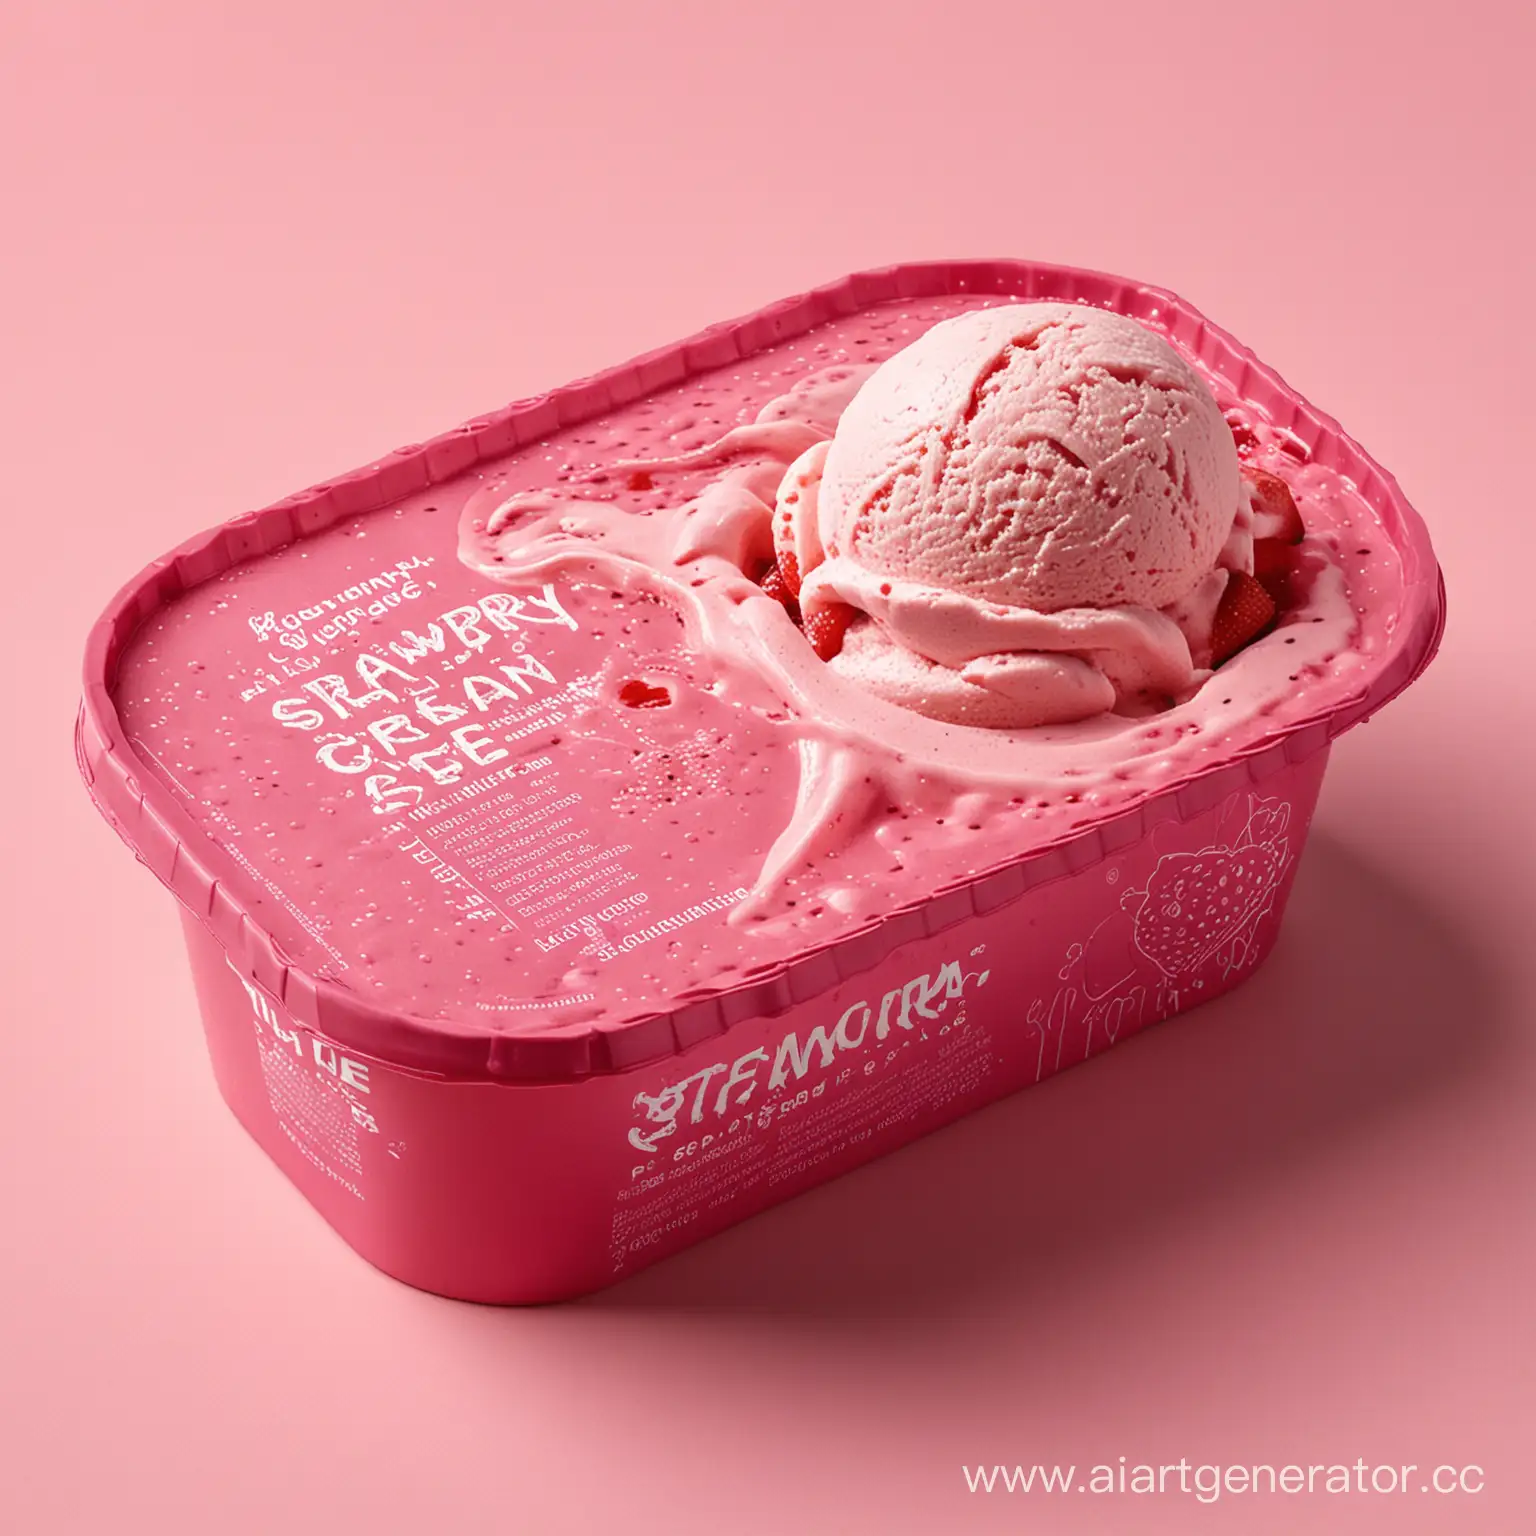 Vibrant-Pink-Packaging-for-Delicious-Strawberry-Ice-Cream